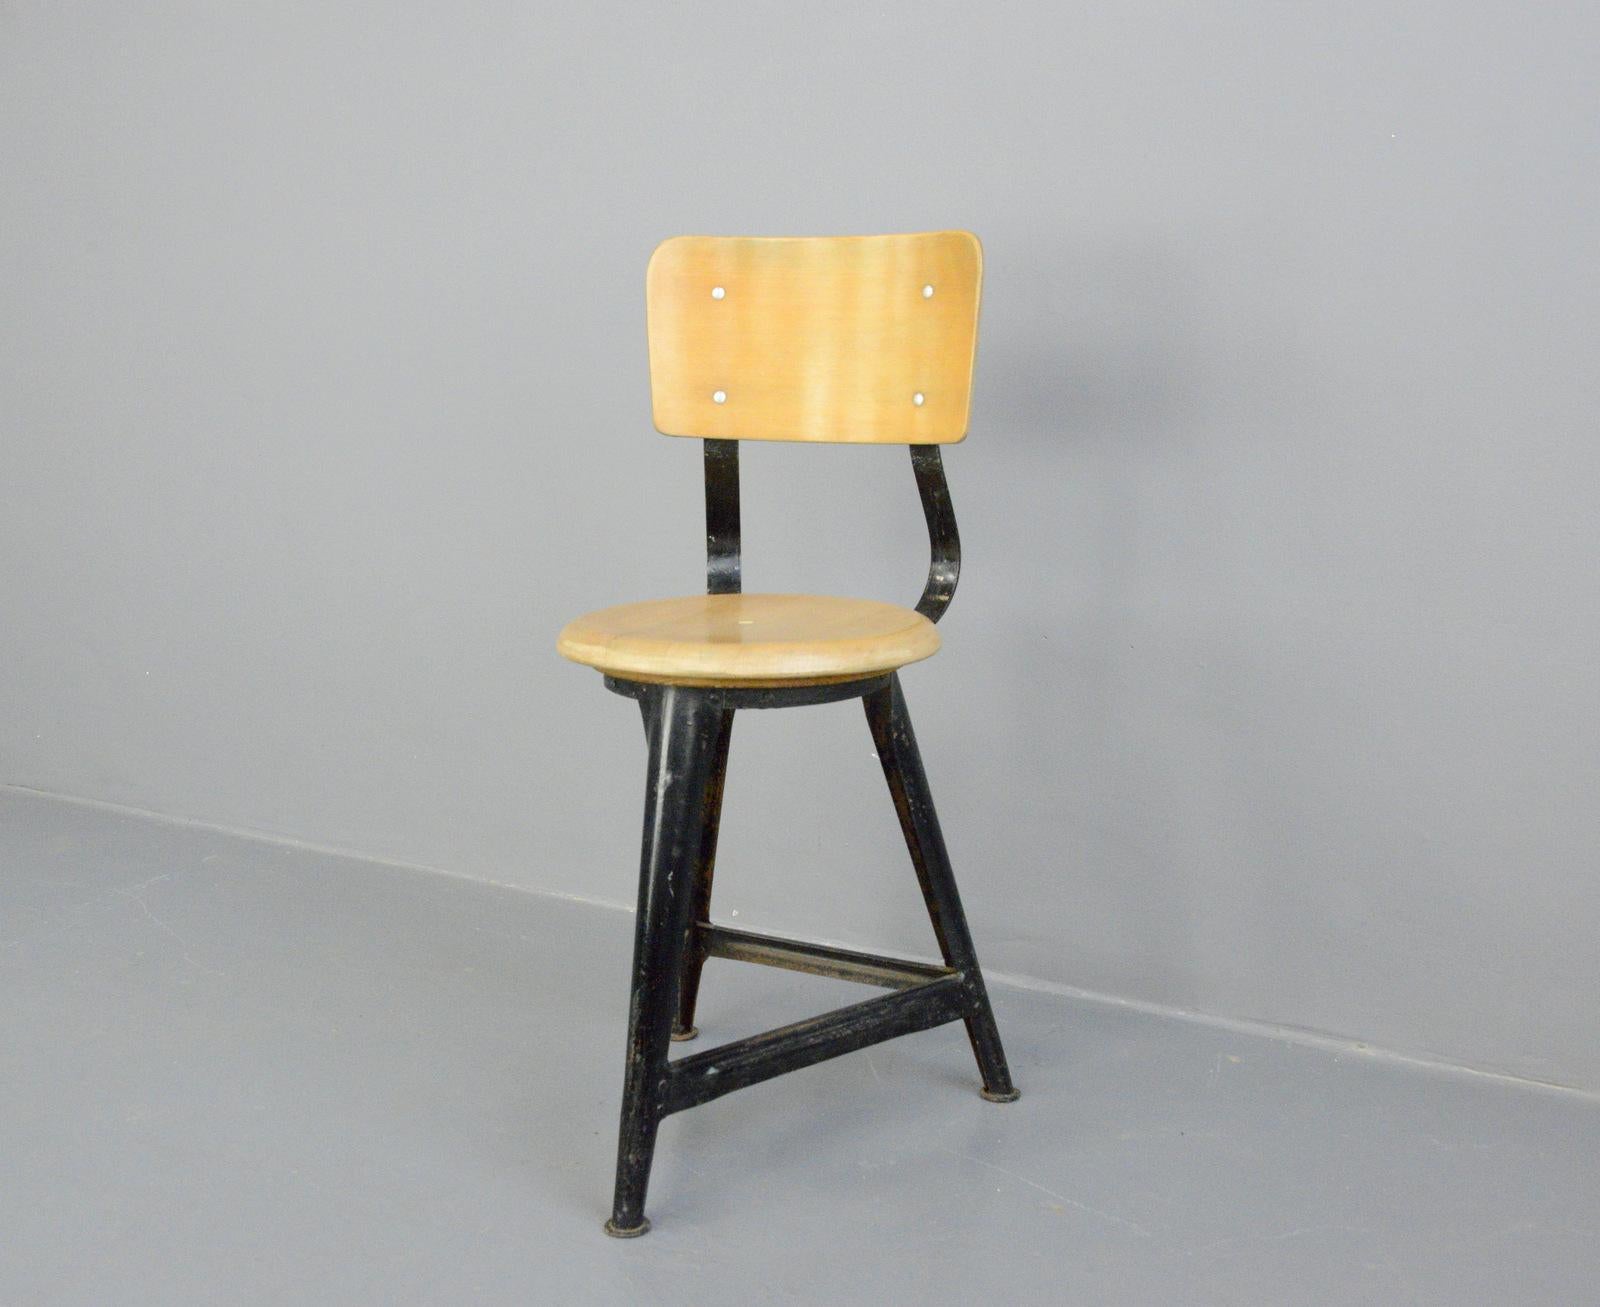 Industrial work stools by Ama, circa 1930s

- Price is per stool
- Steel frame
- Solid Elm seat with ply backrest
- Designed by Albert Menger
- Produced by Ama, Nordhalben
- German, 1930s
- Measures: 35cm wide x 41cm deep
- 50cm seat